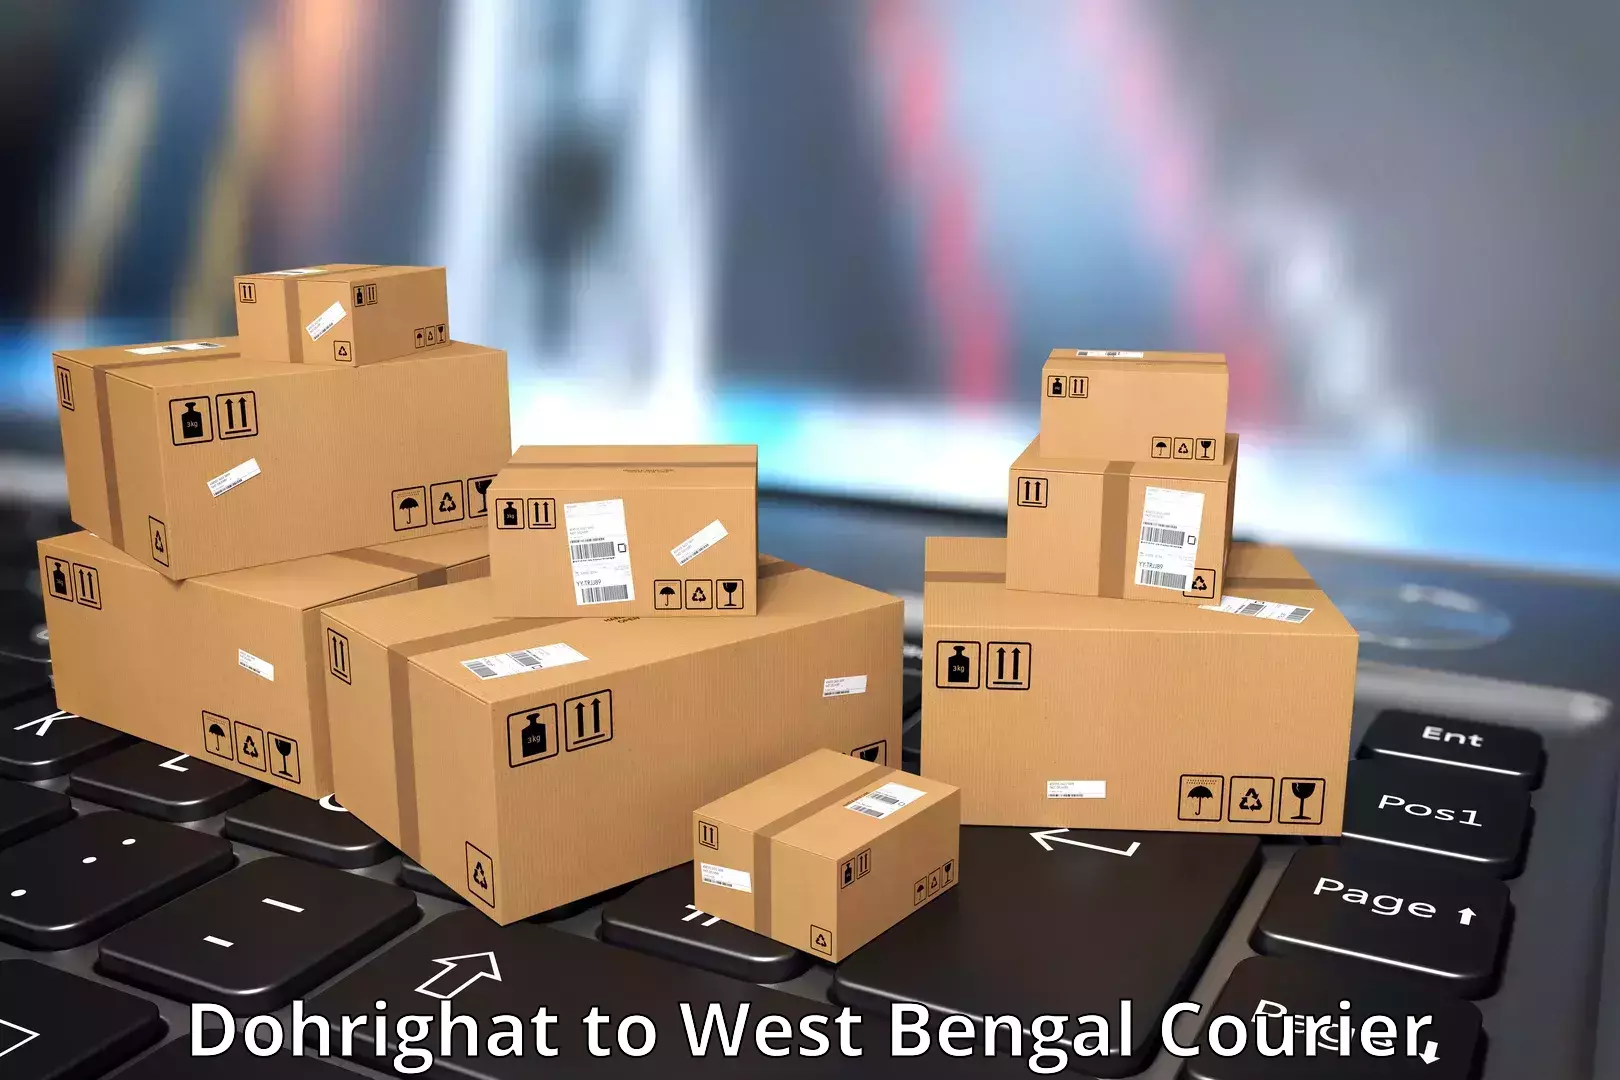 Express package handling Dohrighat to West Bengal